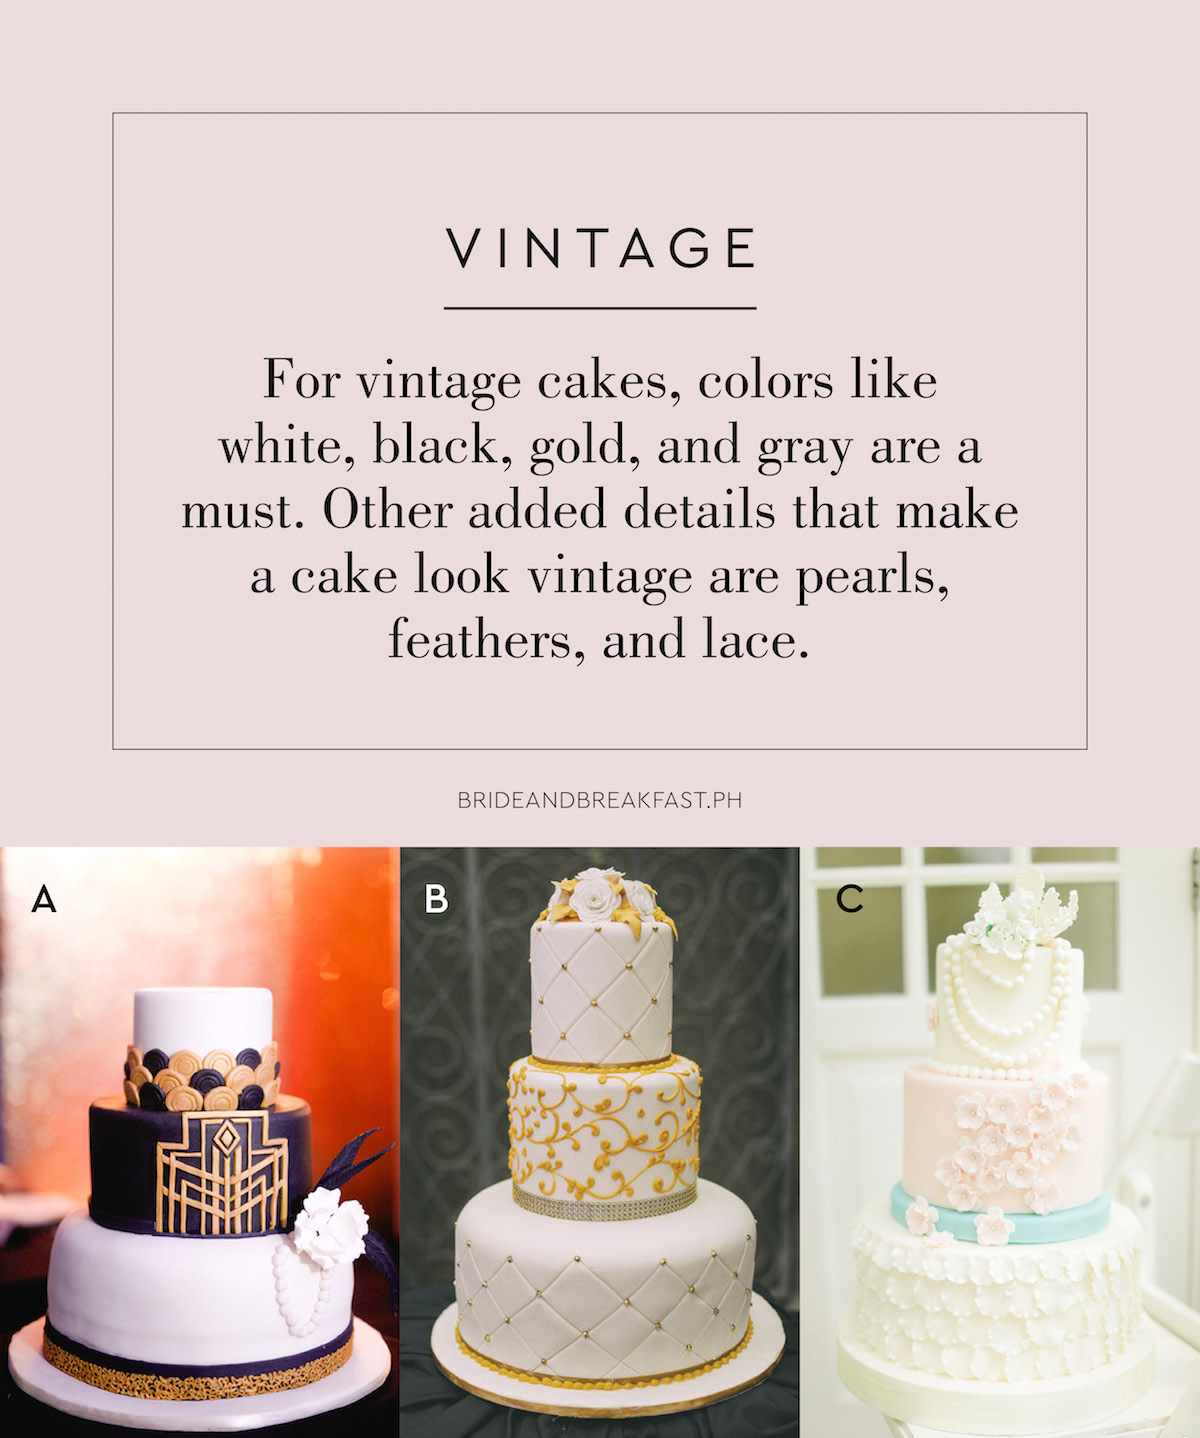 VINTAGE For vintage cakes, colors like white, black, gold, and gray are a must. Other added details that make a cake look vintage are pearls, feathers, and lace.